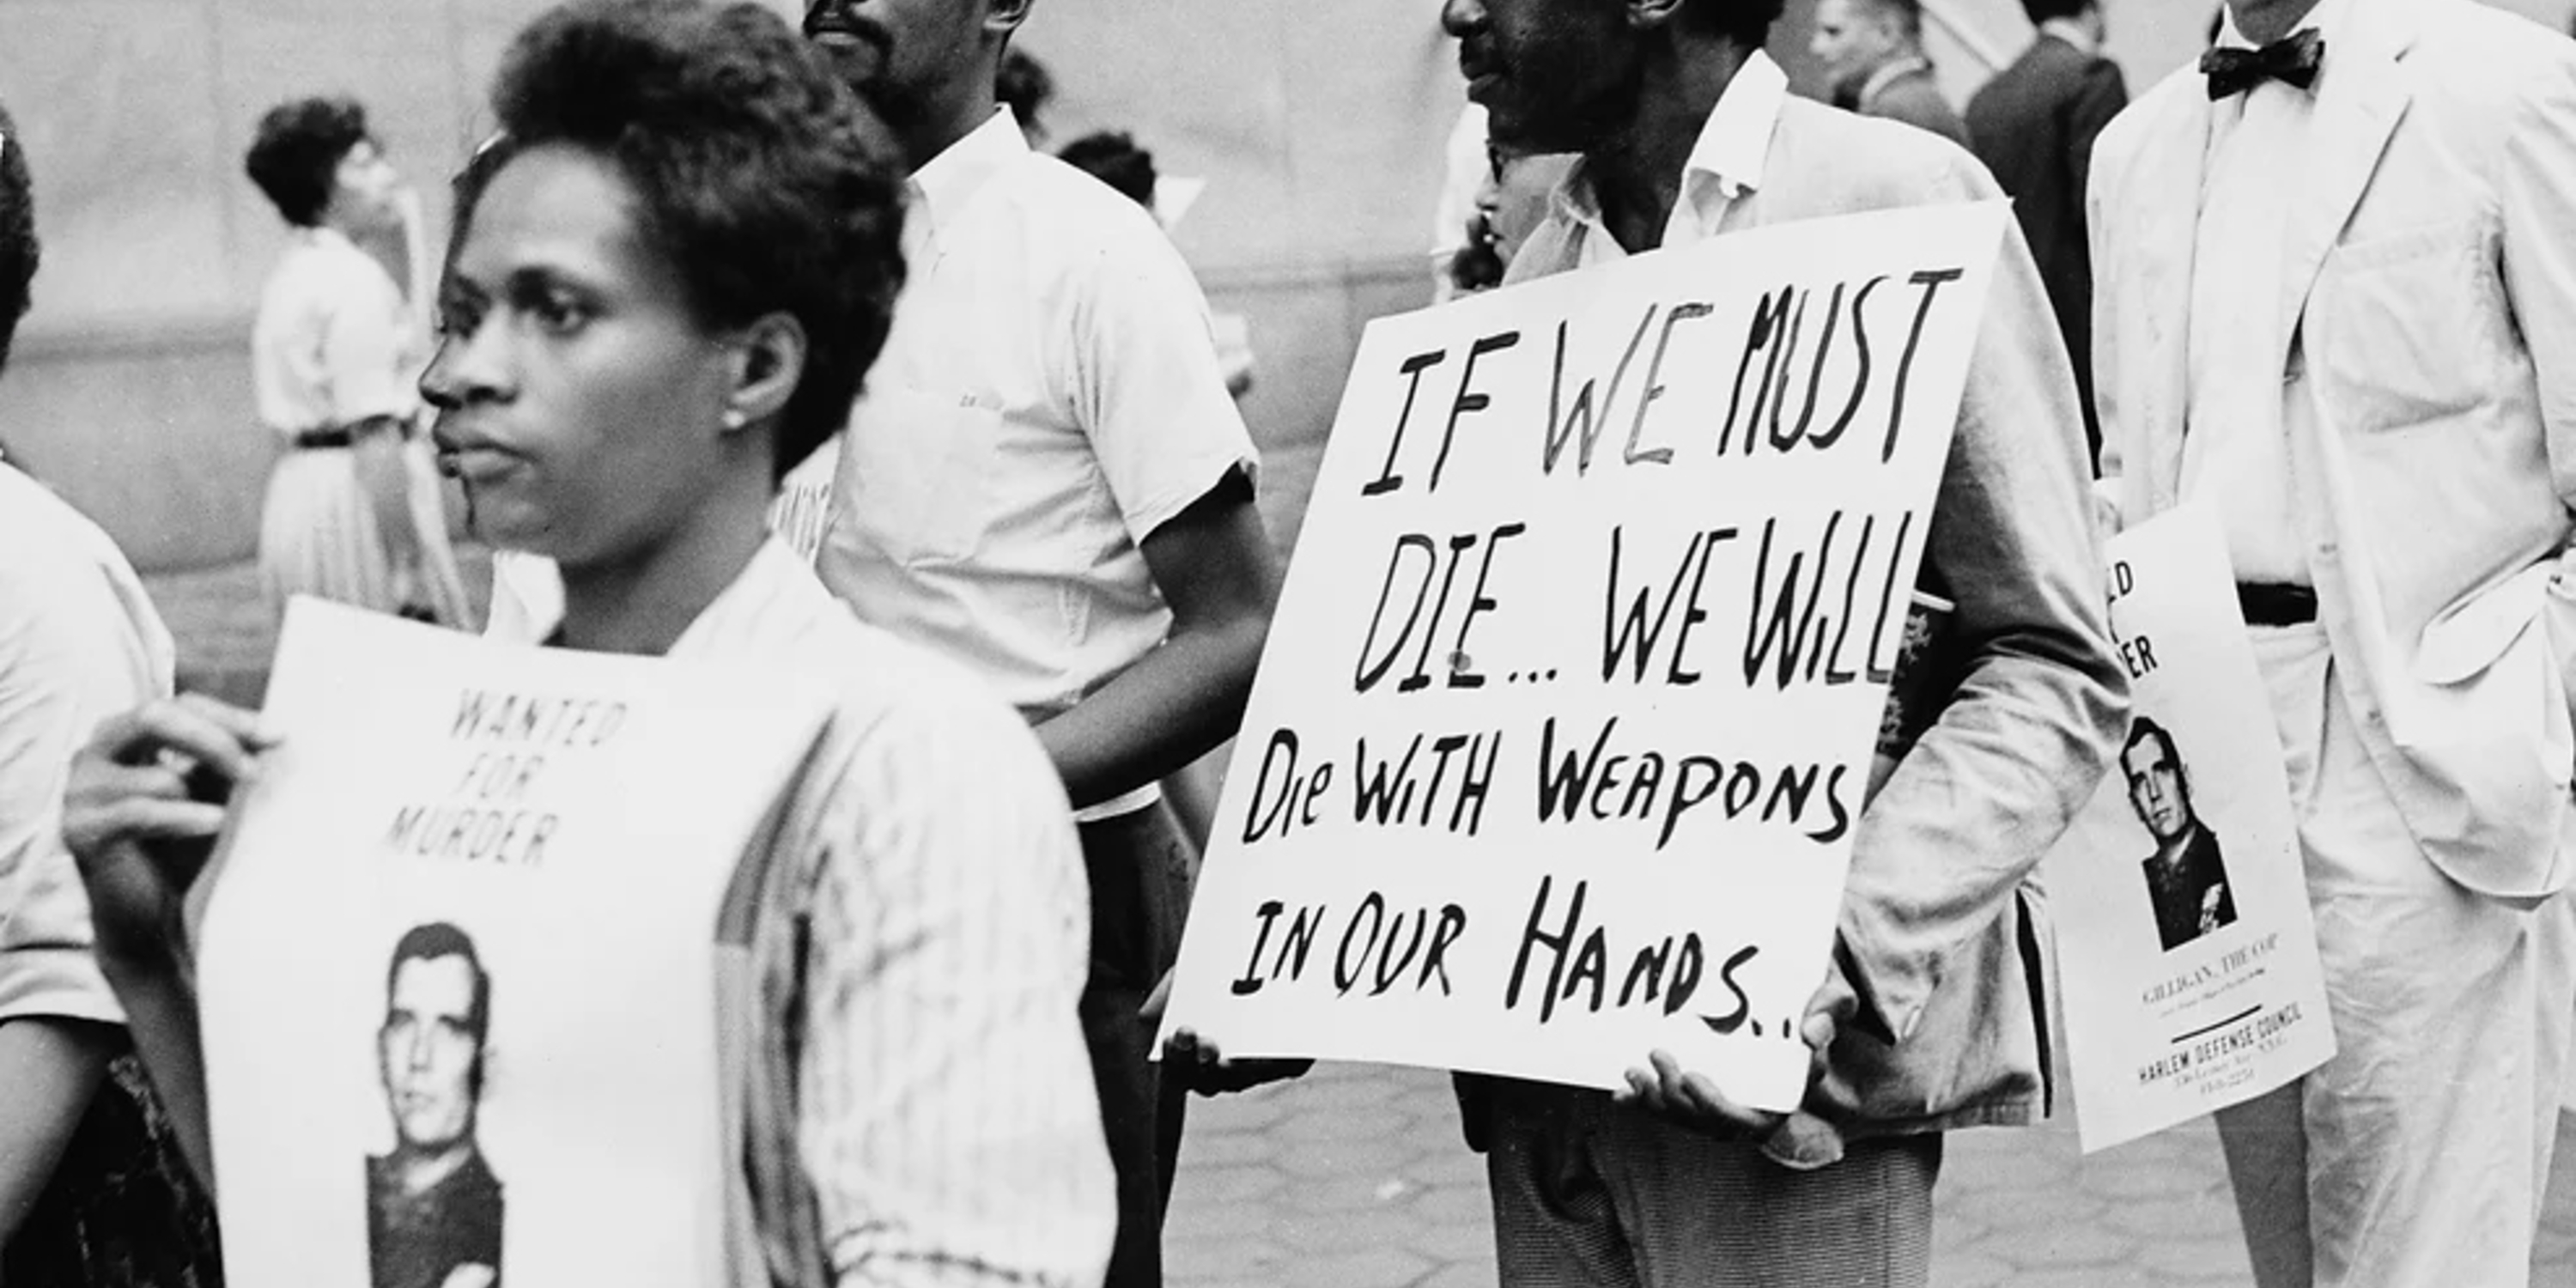 Black Americans protesting the Gilligan case - Photo by Archive Photos/Getty Images